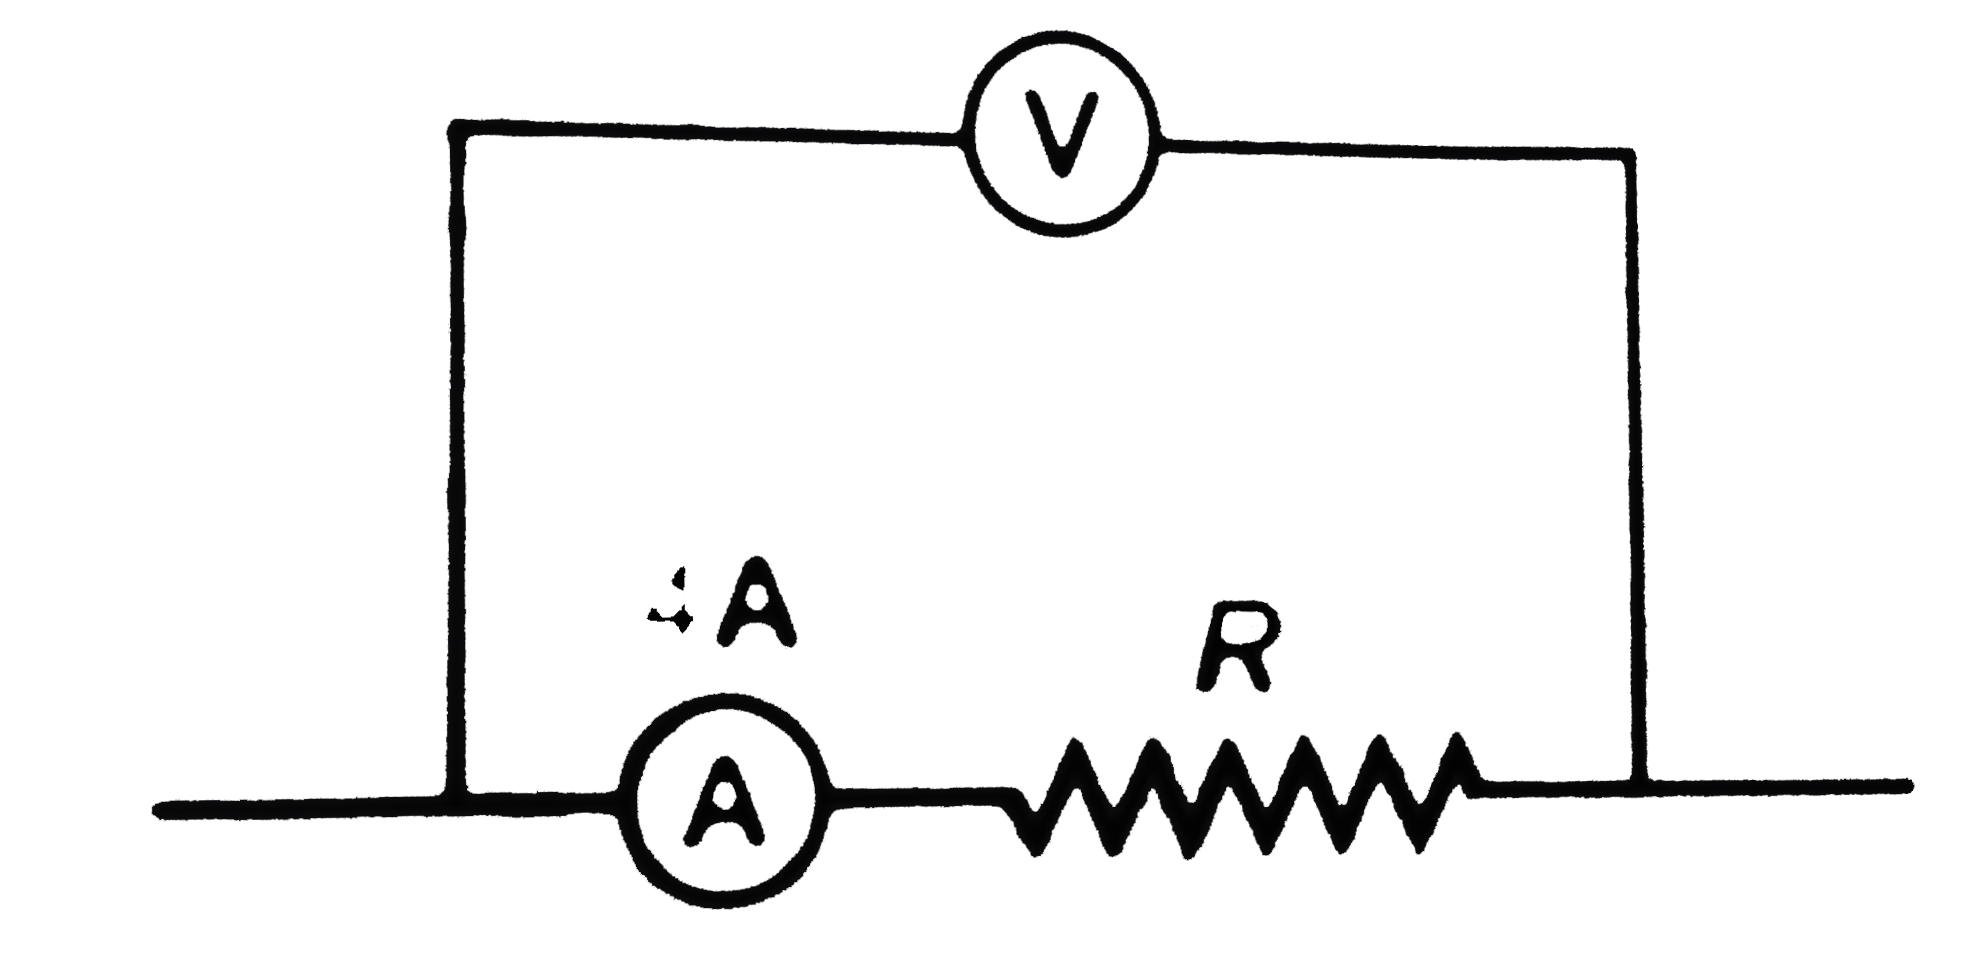 A students connects an ammeter A  and a voltmeter V to measure a resistancer as shown in figure. If the voltmeter reads 20 V and the ammeter reads 4A, then R is